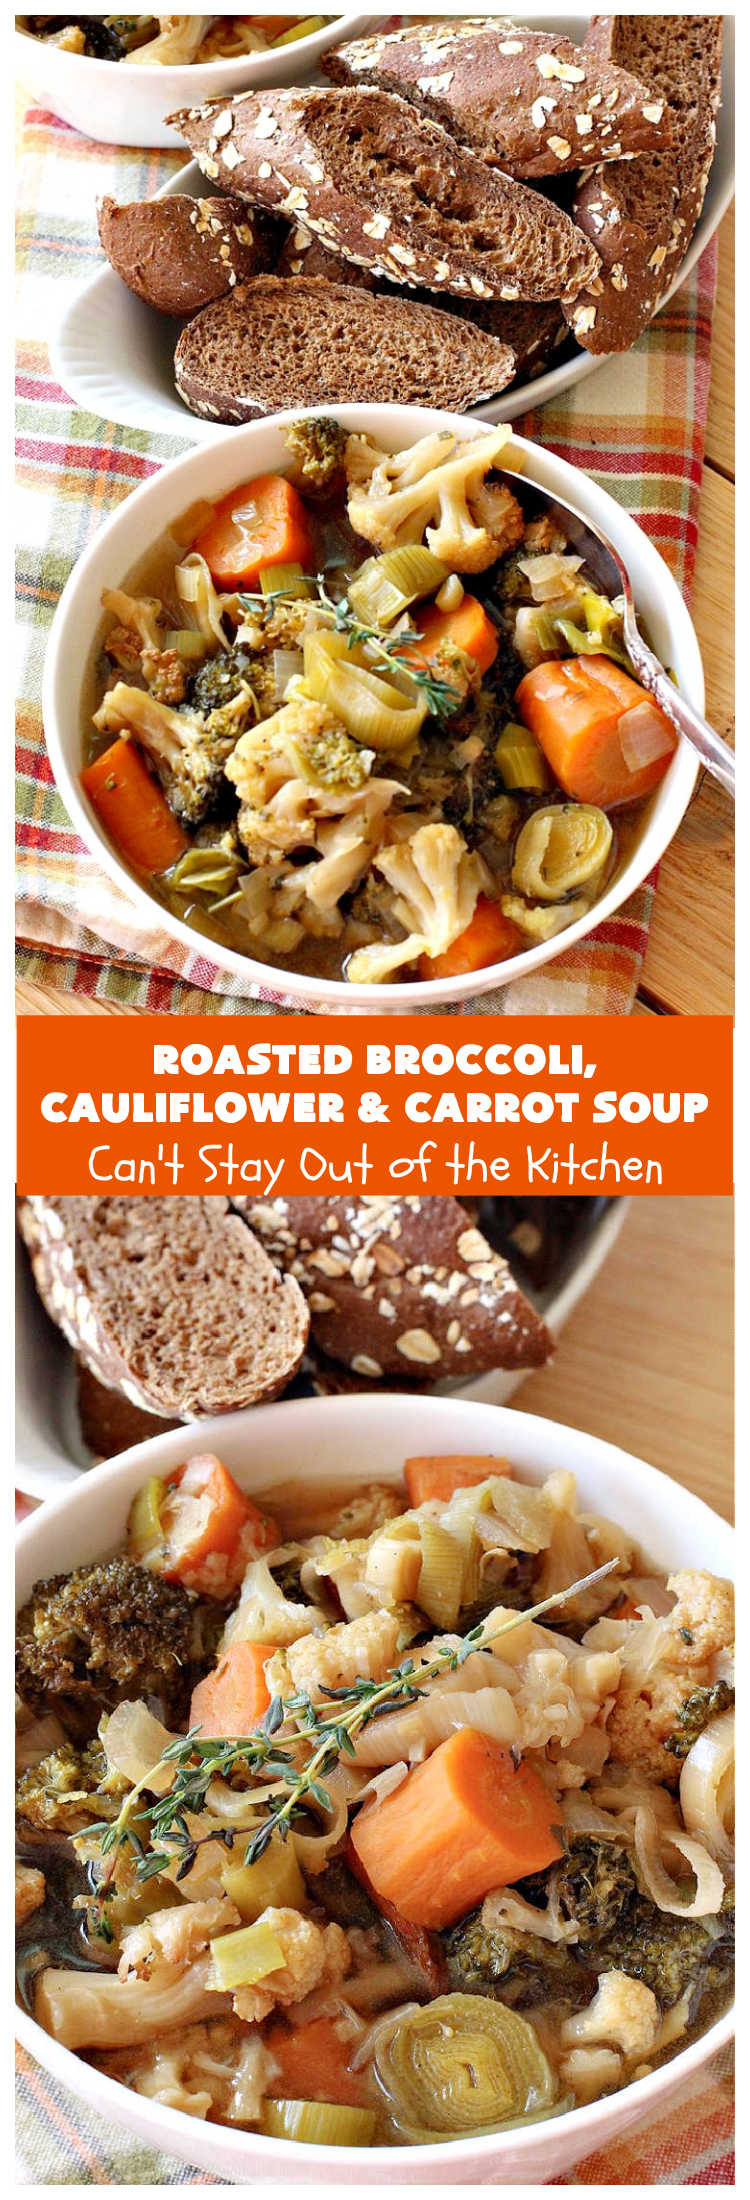 Roasted Broccoli, Cauliflower & Carrot Soup | Can't Stay Out of the Kitchen